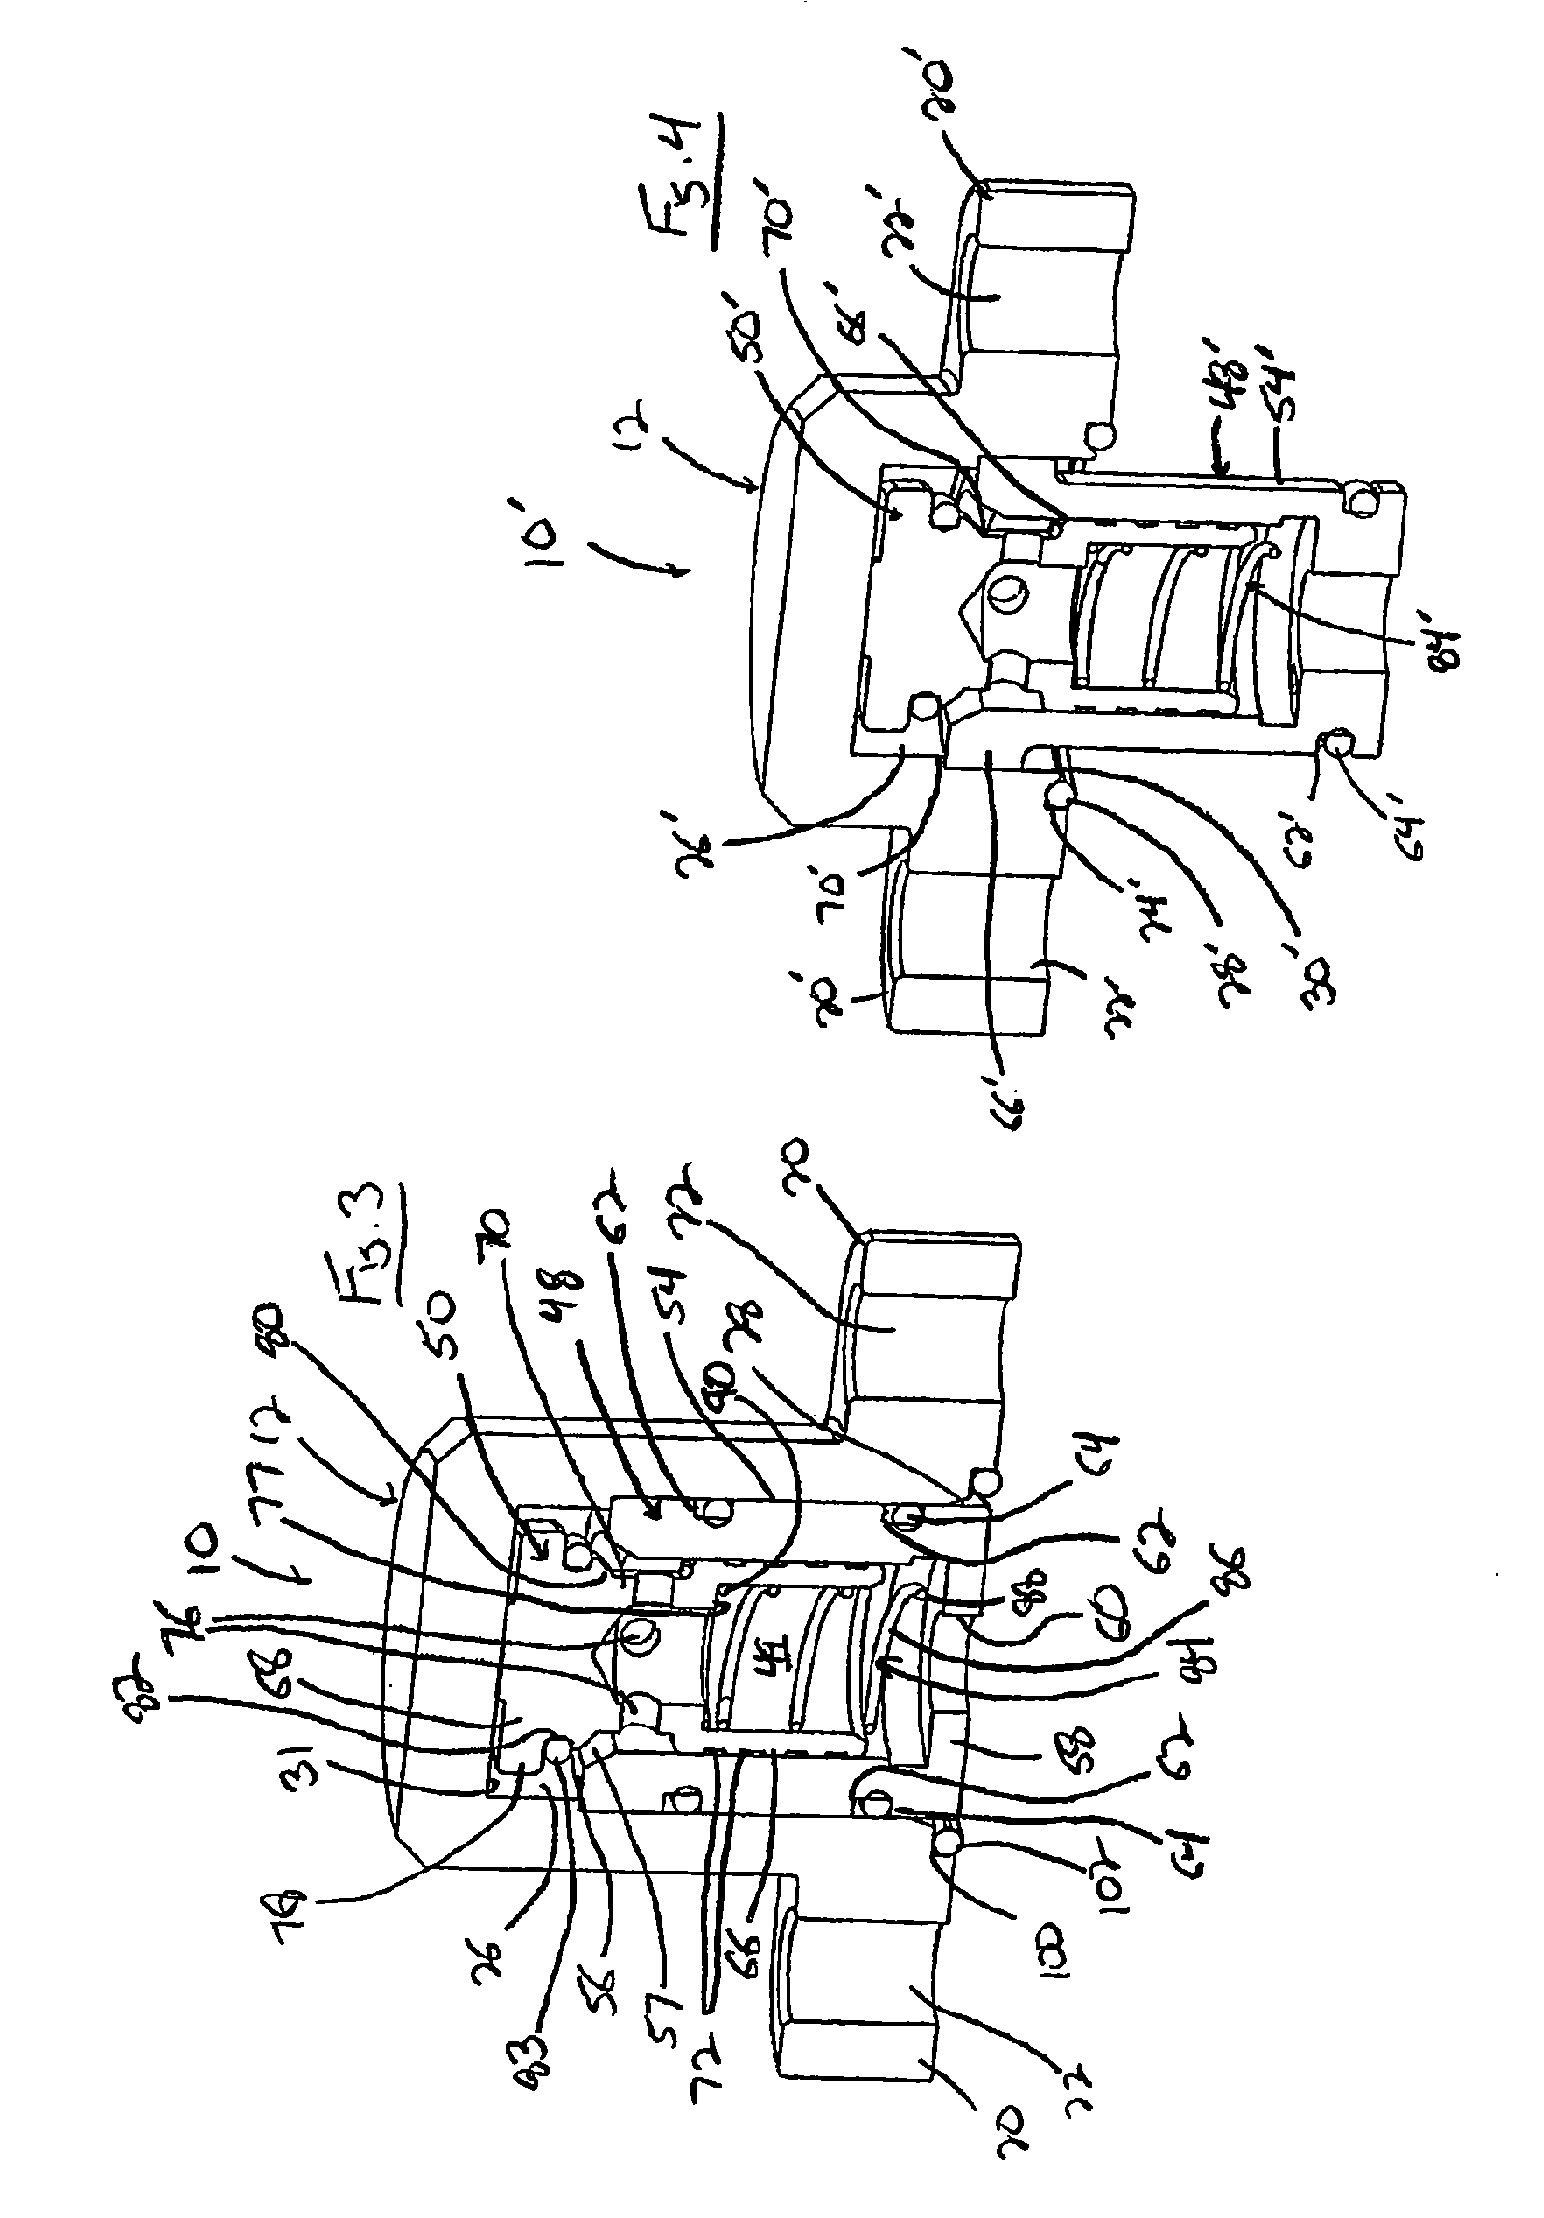 Central Tire Inflation Wheel Assembly and Valve